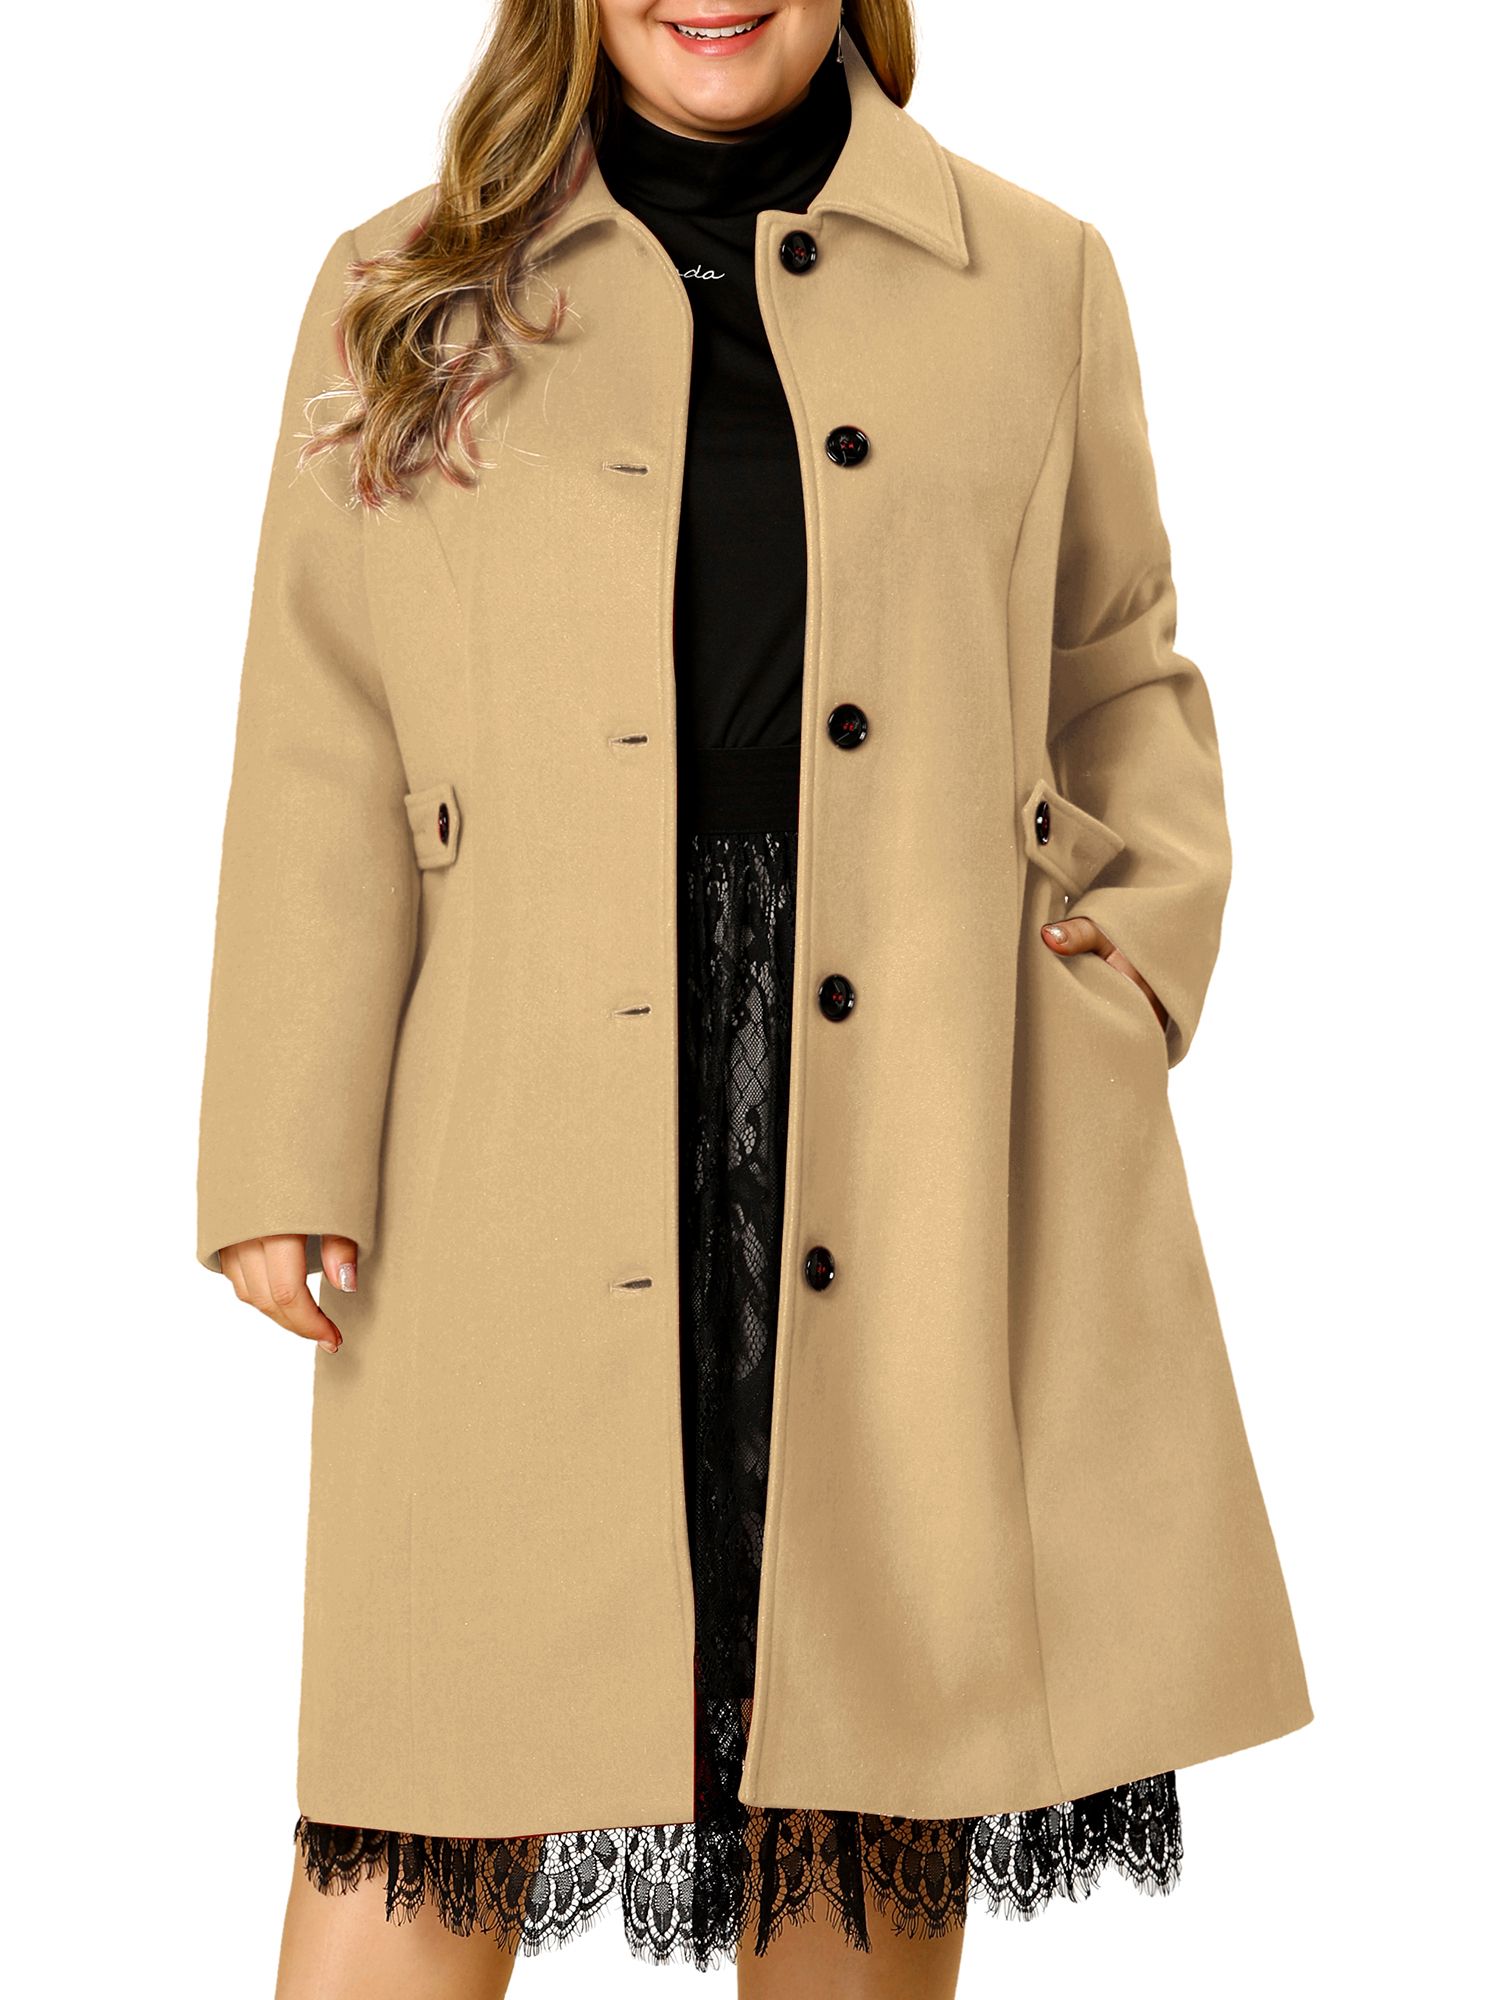 Women's Loose Winter Jackets Solid Mid Long Hooded Coats Three Colors Plus Sizes 